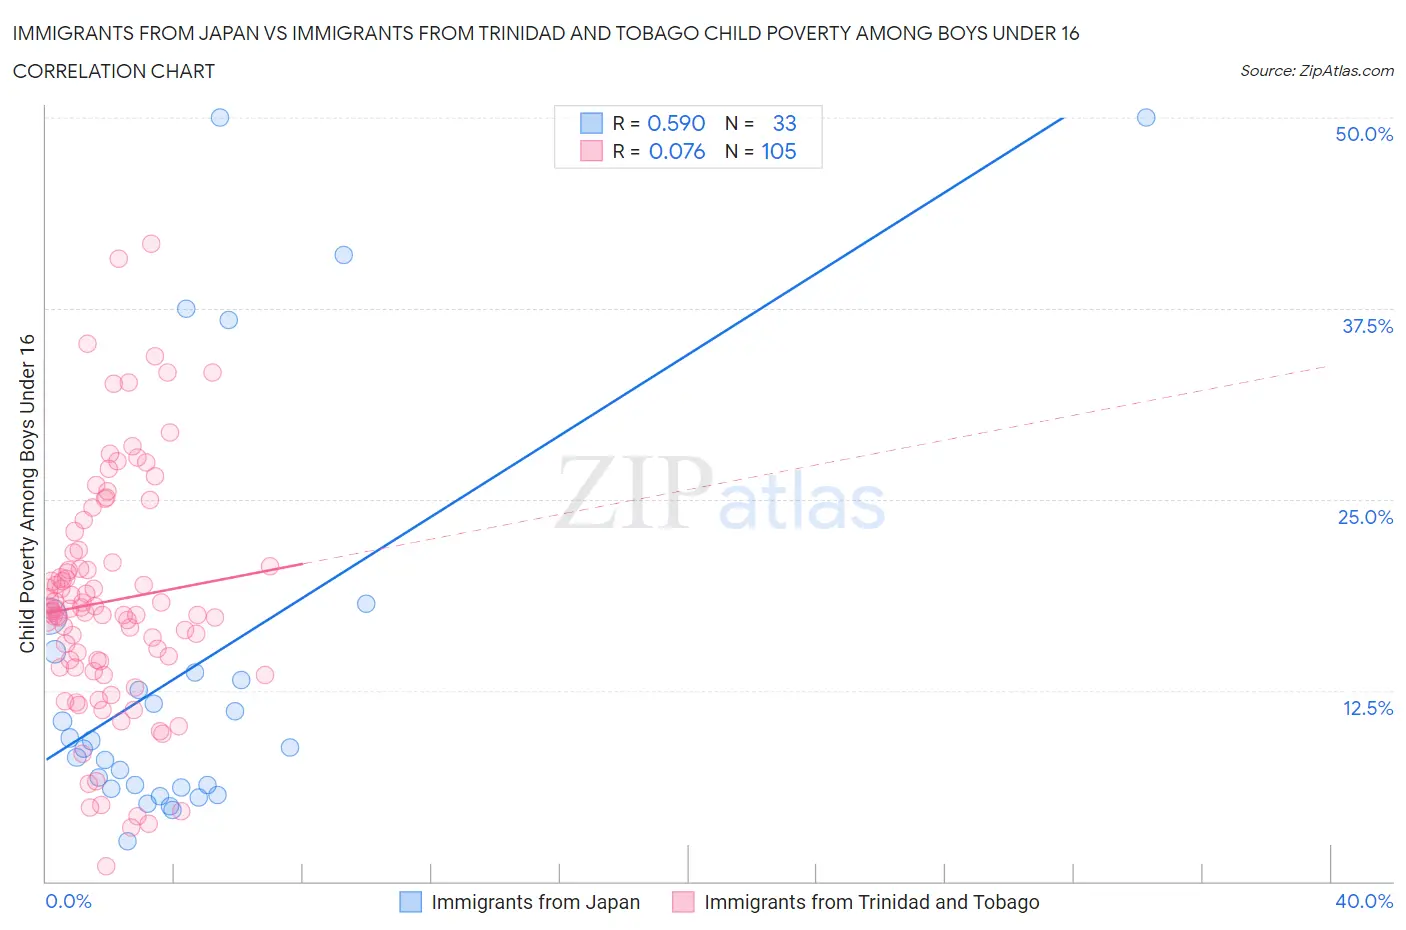 Immigrants from Japan vs Immigrants from Trinidad and Tobago Child Poverty Among Boys Under 16